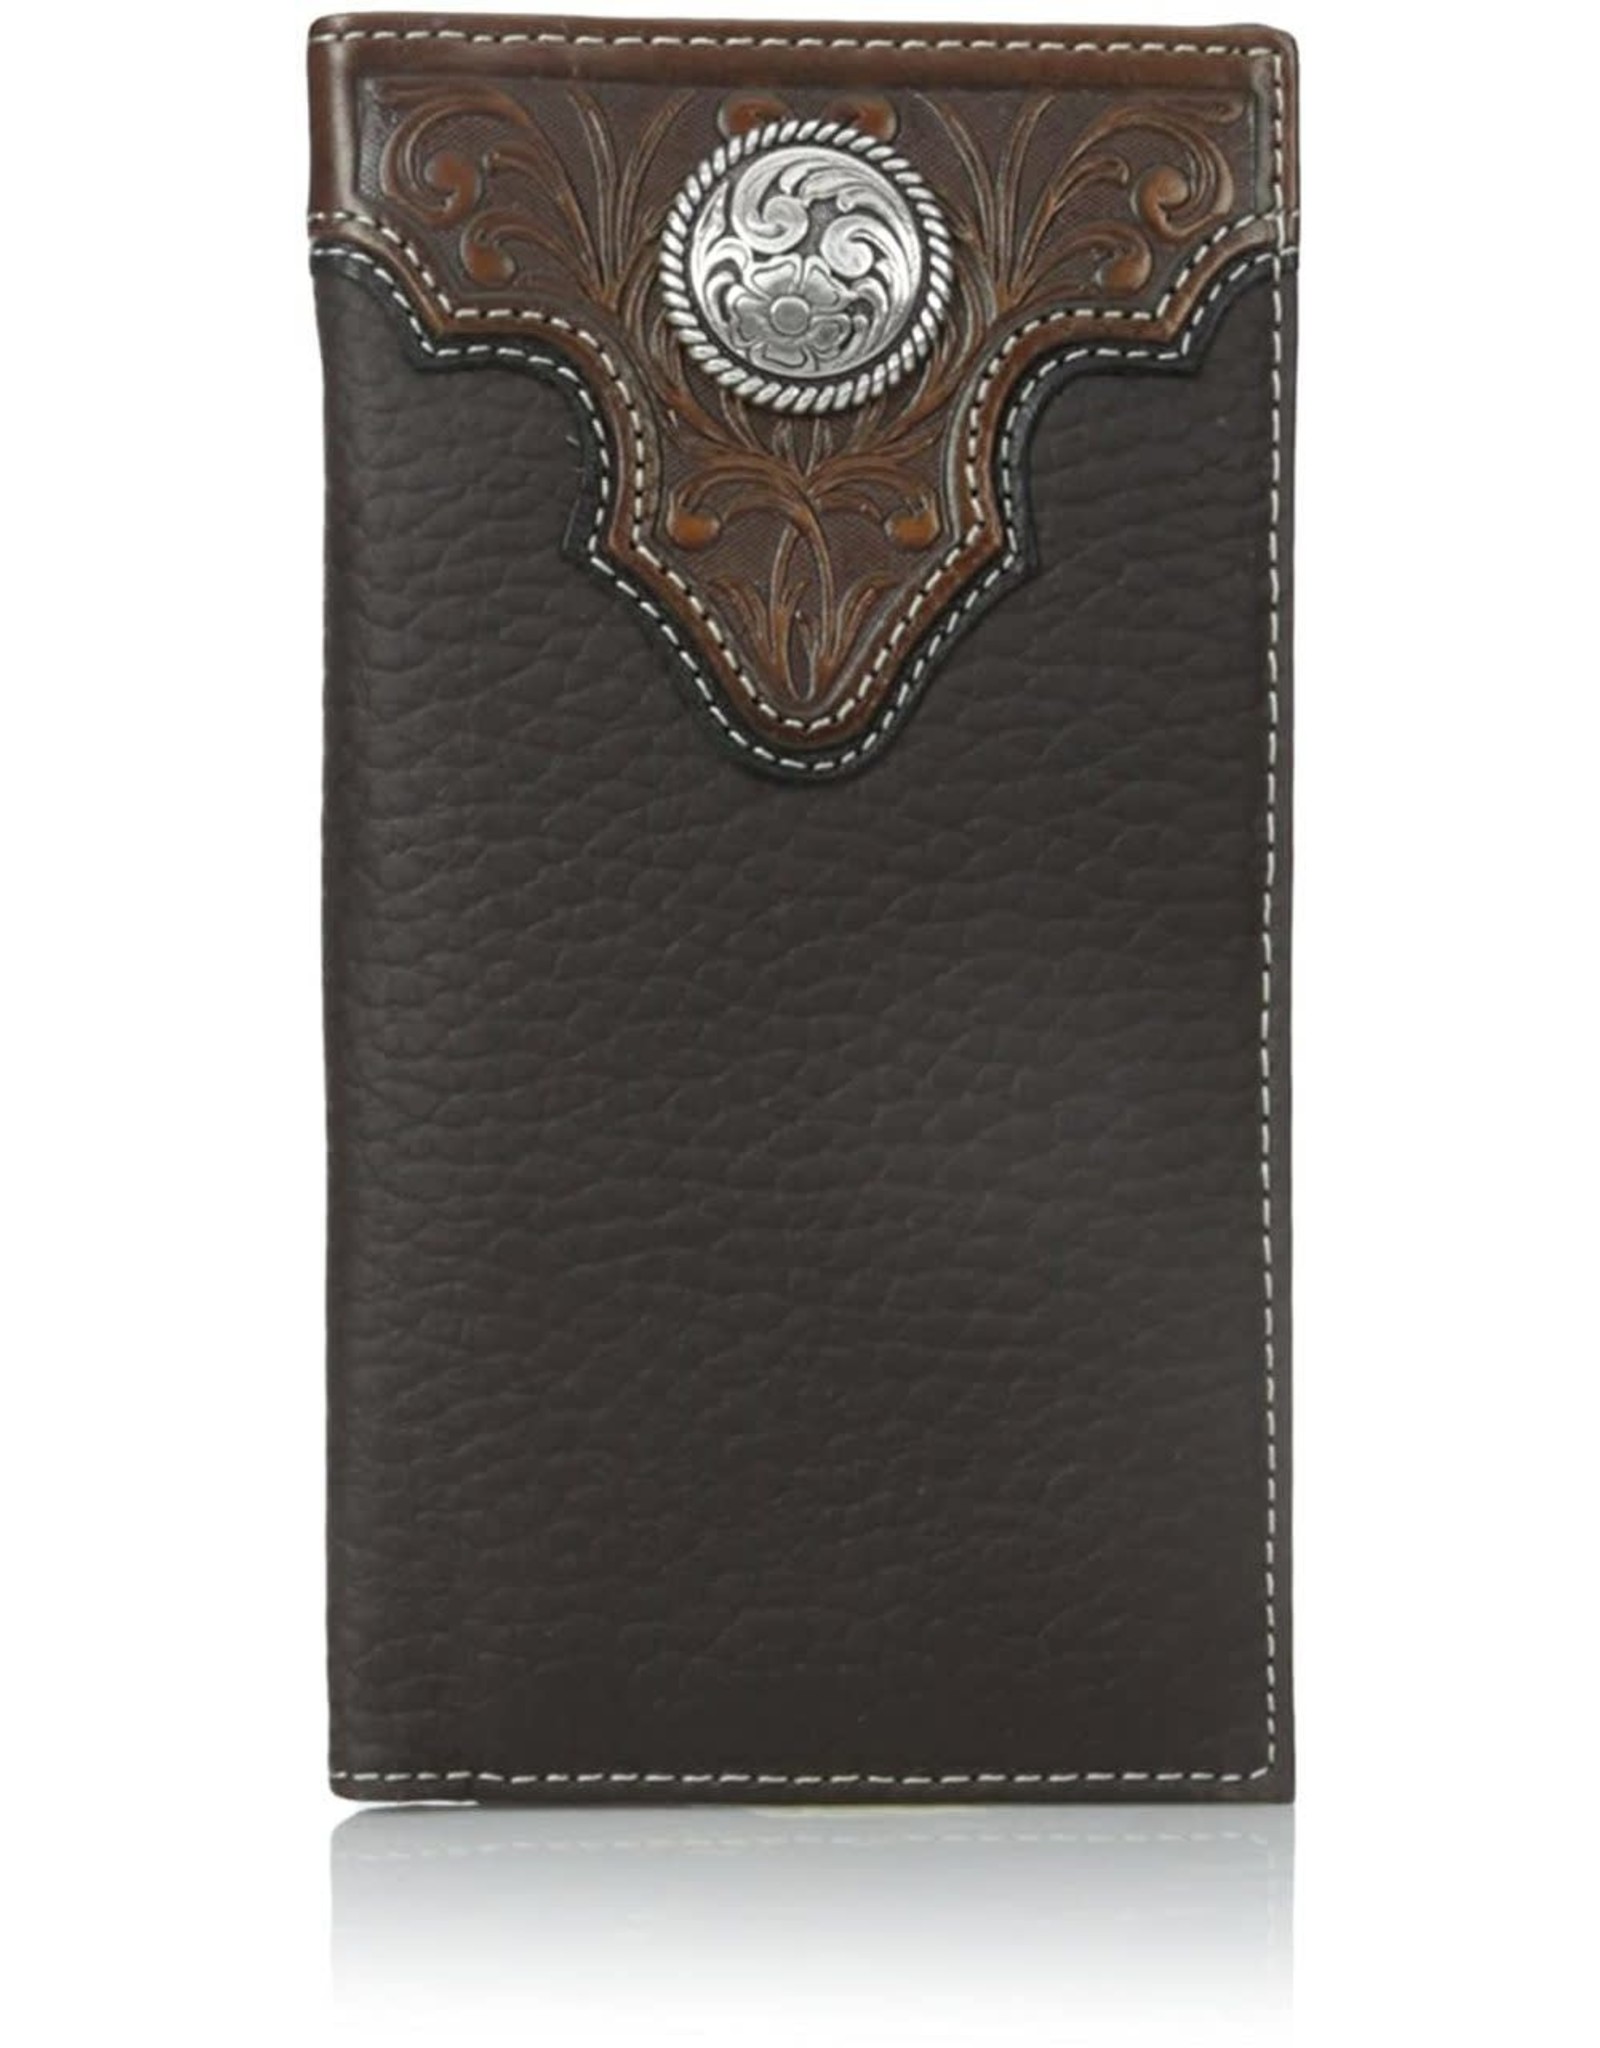 Ariat Stamped Concho Rodeo Wallet A3510202